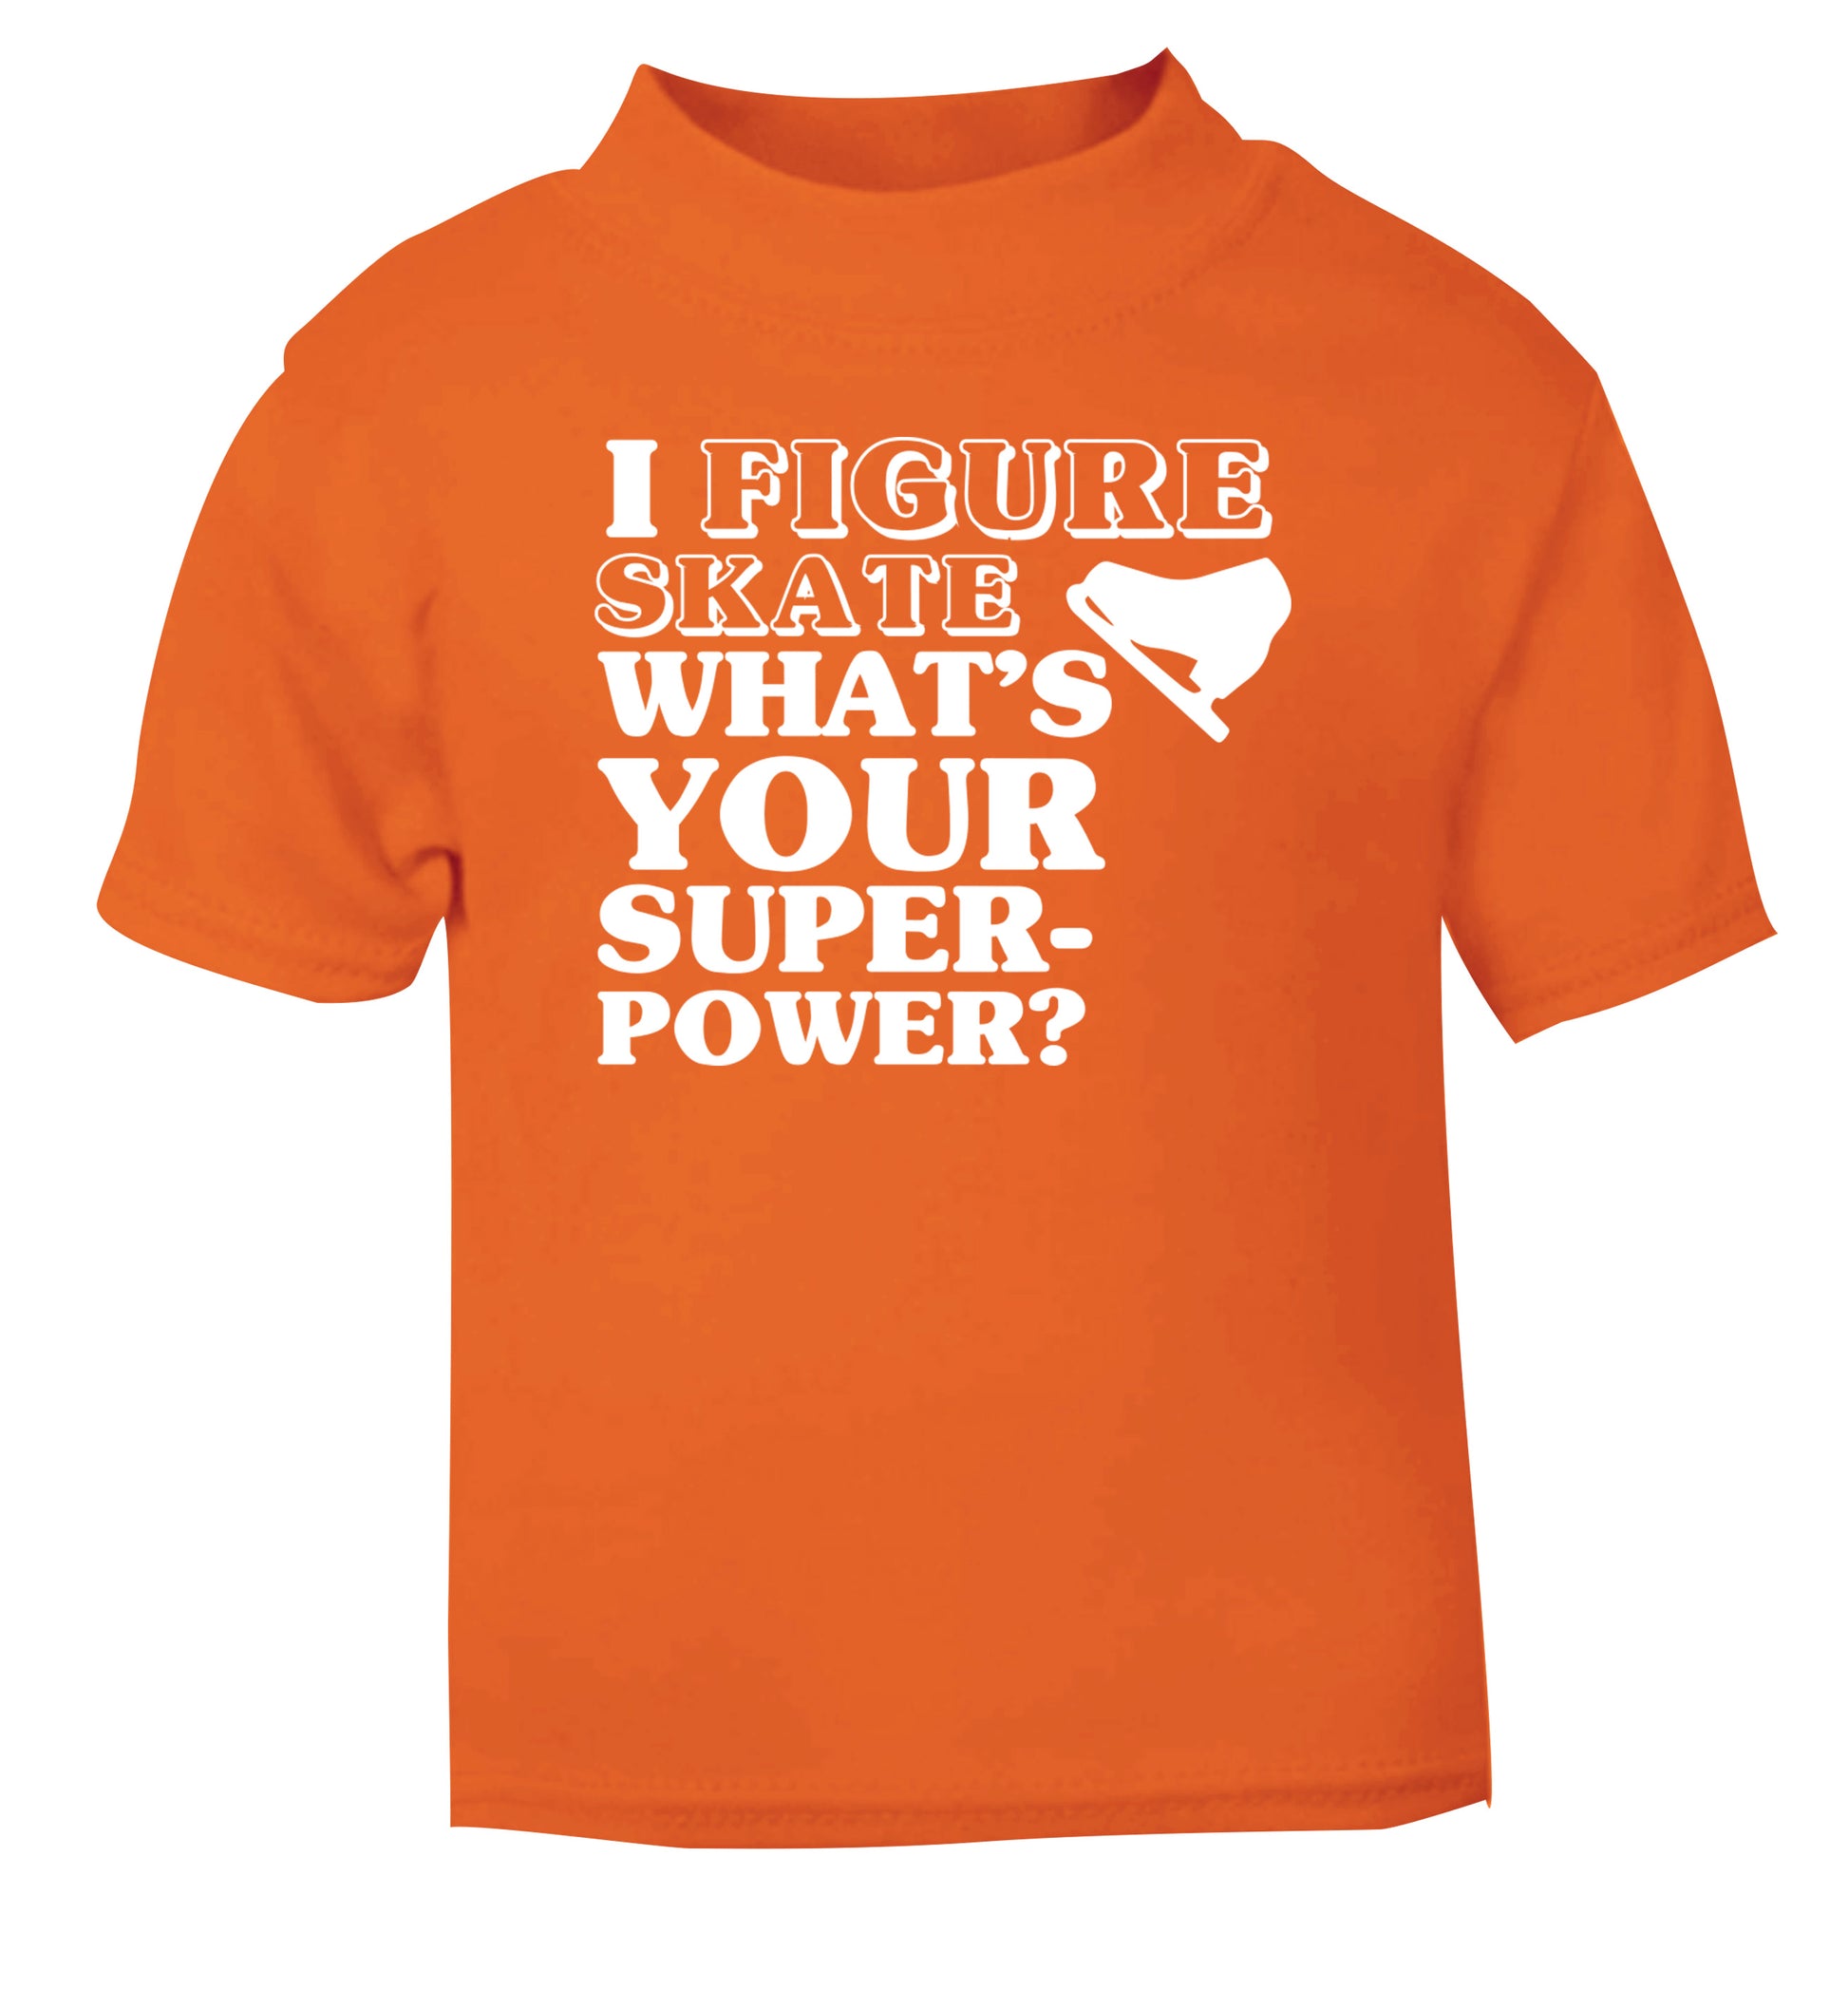 I figure skate what's your superpower? orange Baby Toddler Tshirt 2 Years